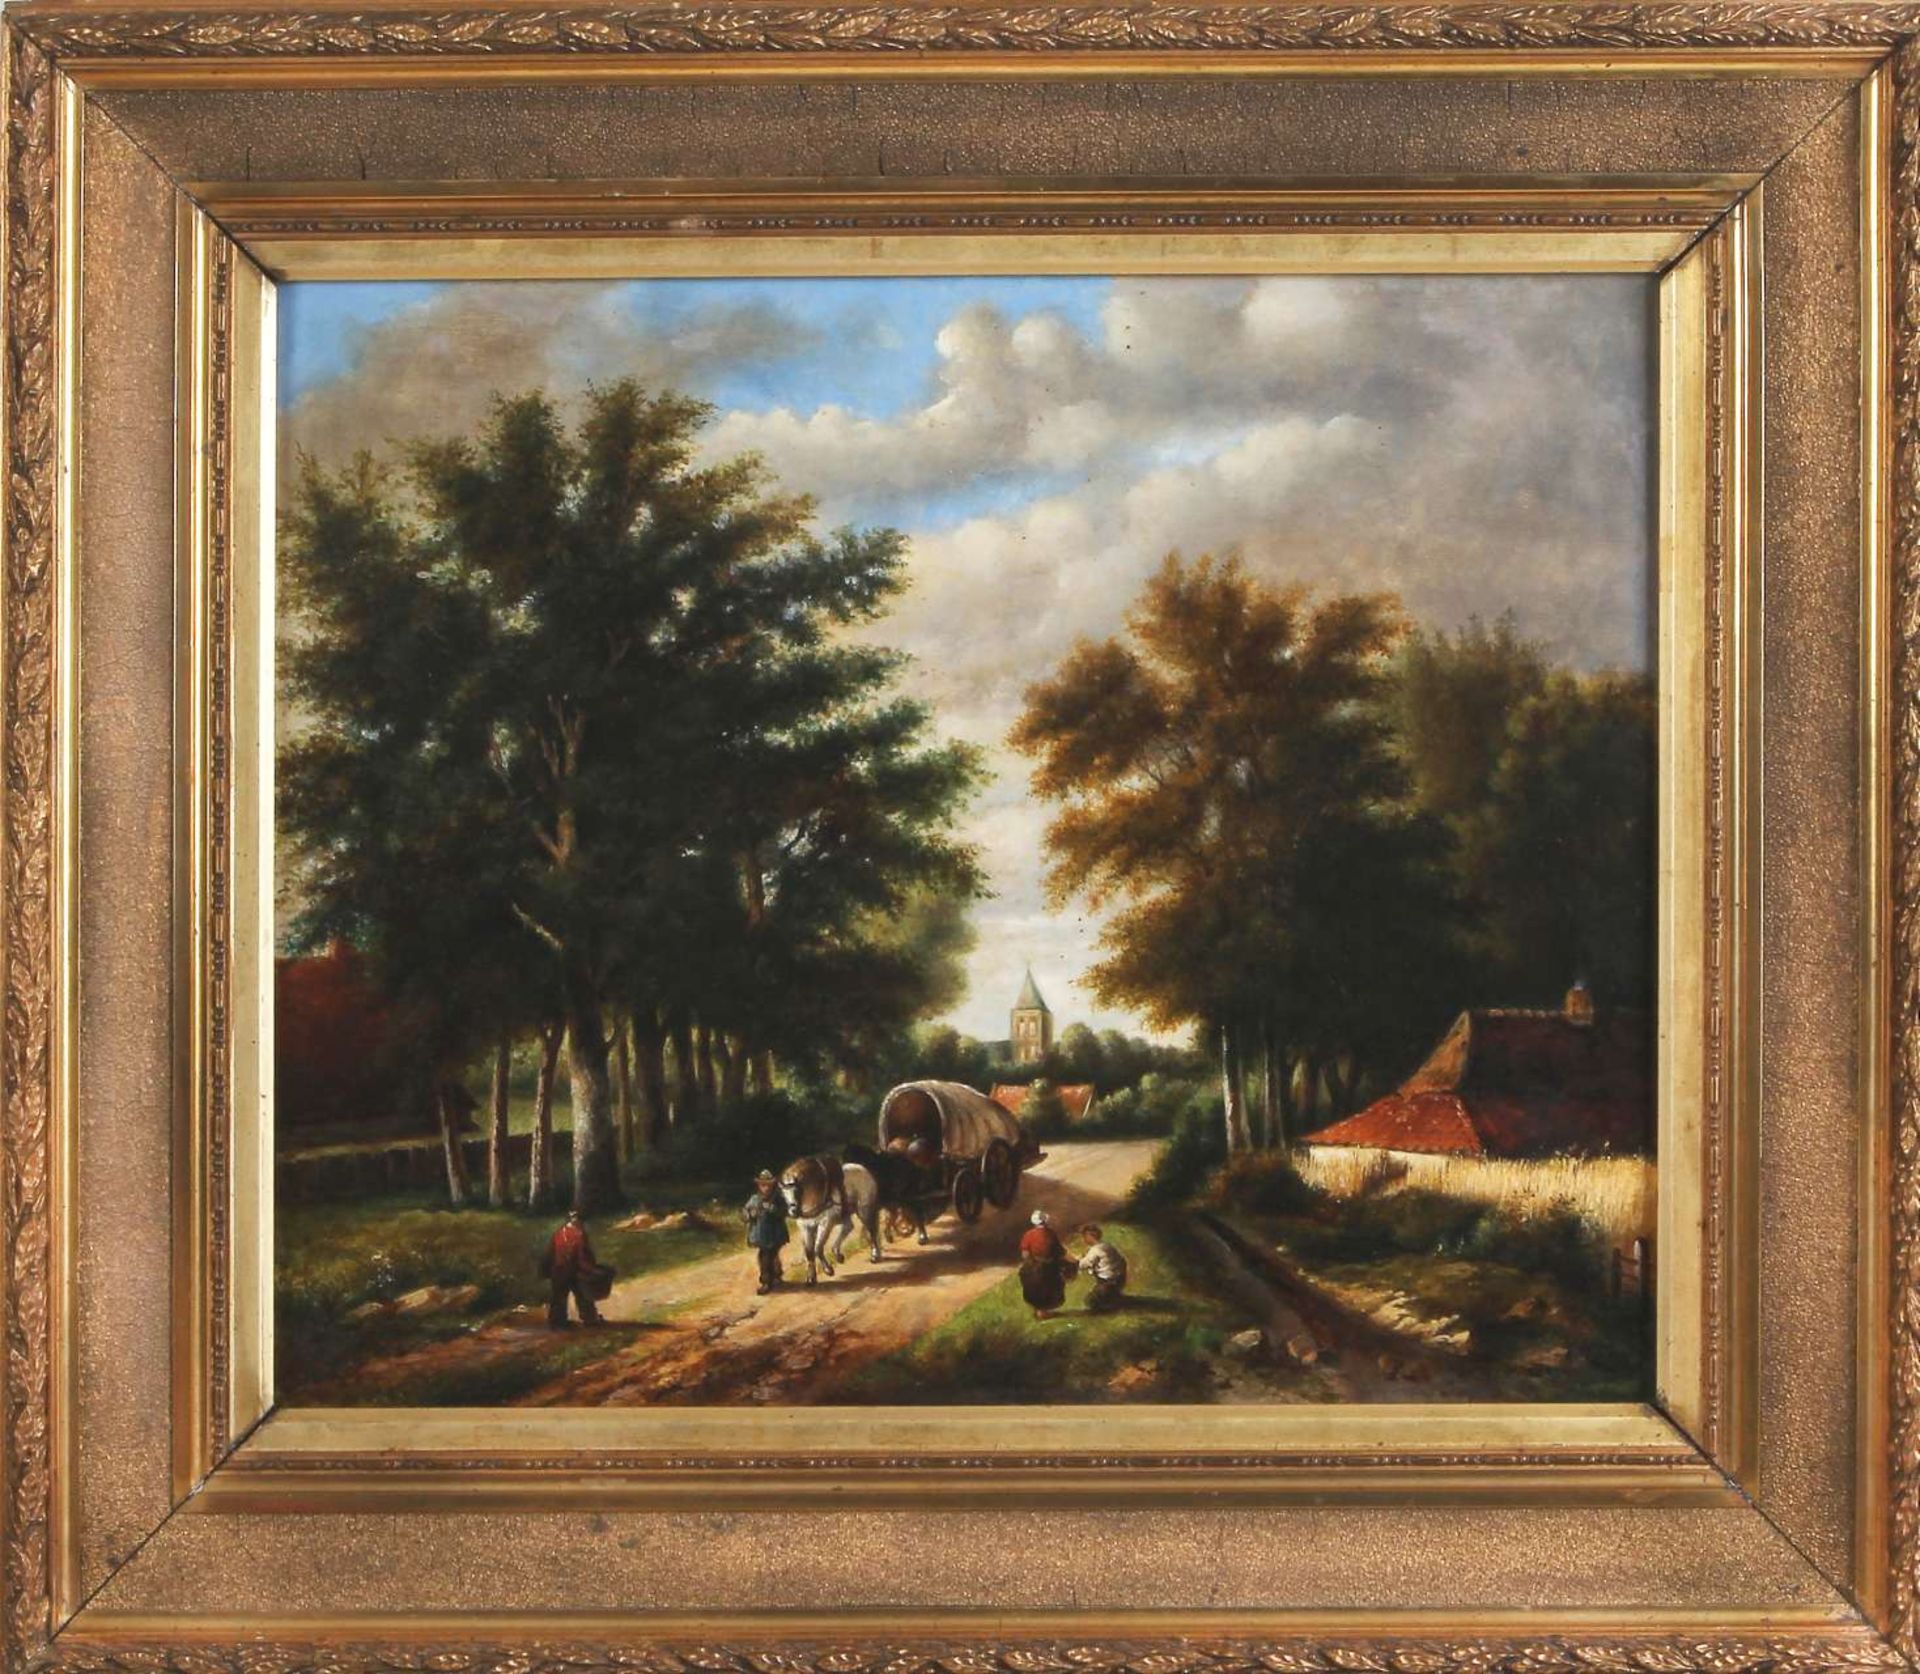 Monogram in 1875, pendant, two landscapes by horse and chariots and figures, oil on panel 35x45cm. - Image 2 of 2